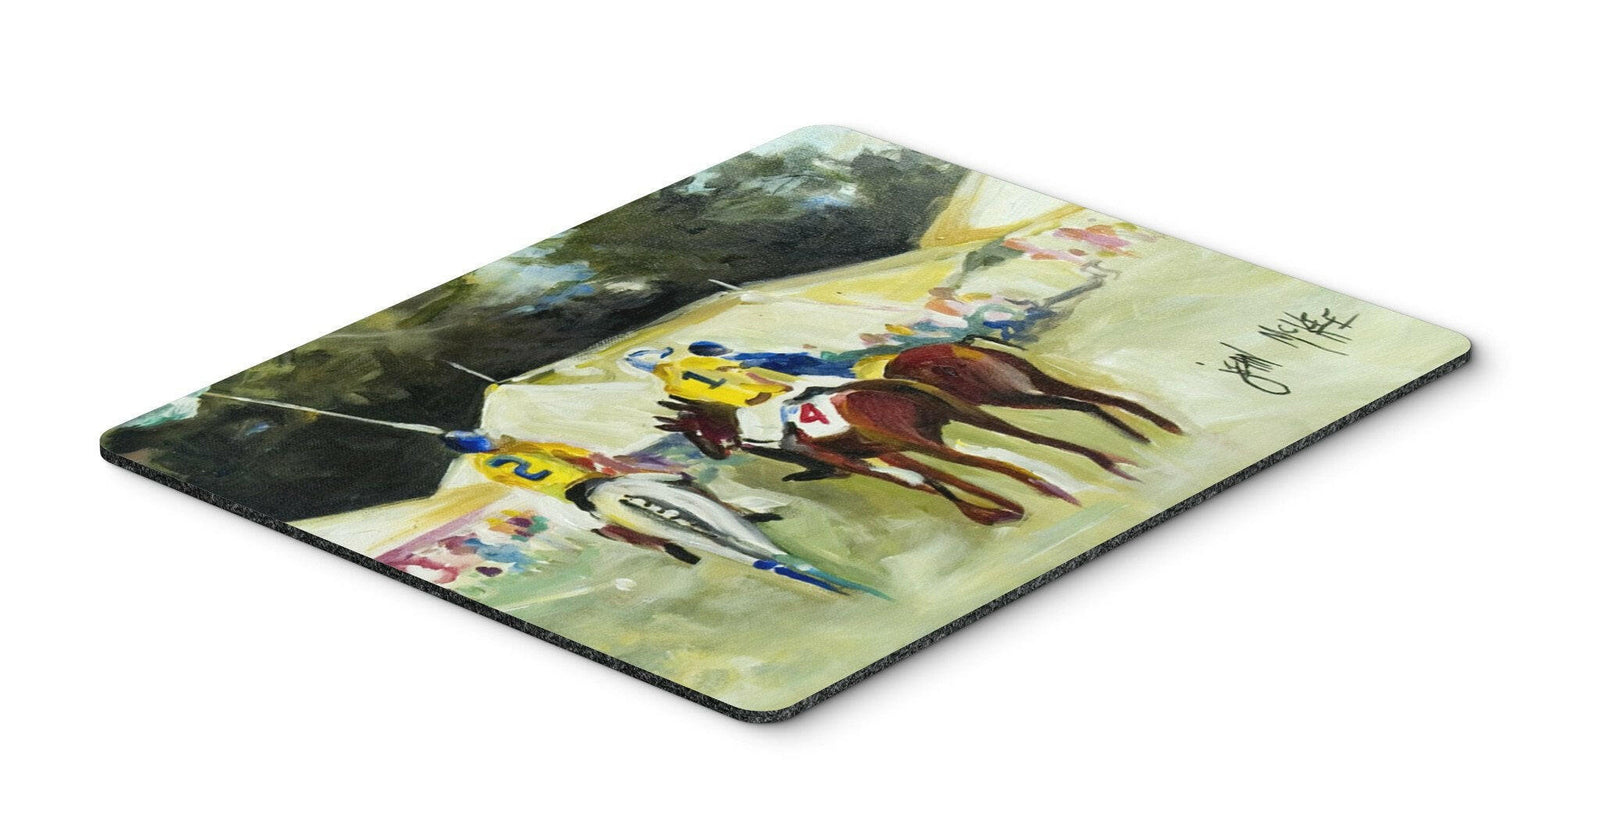 Polo at the Point Mouse Pad, Hot Pad or Trivet JMK1006MP by Caroline's Treasures